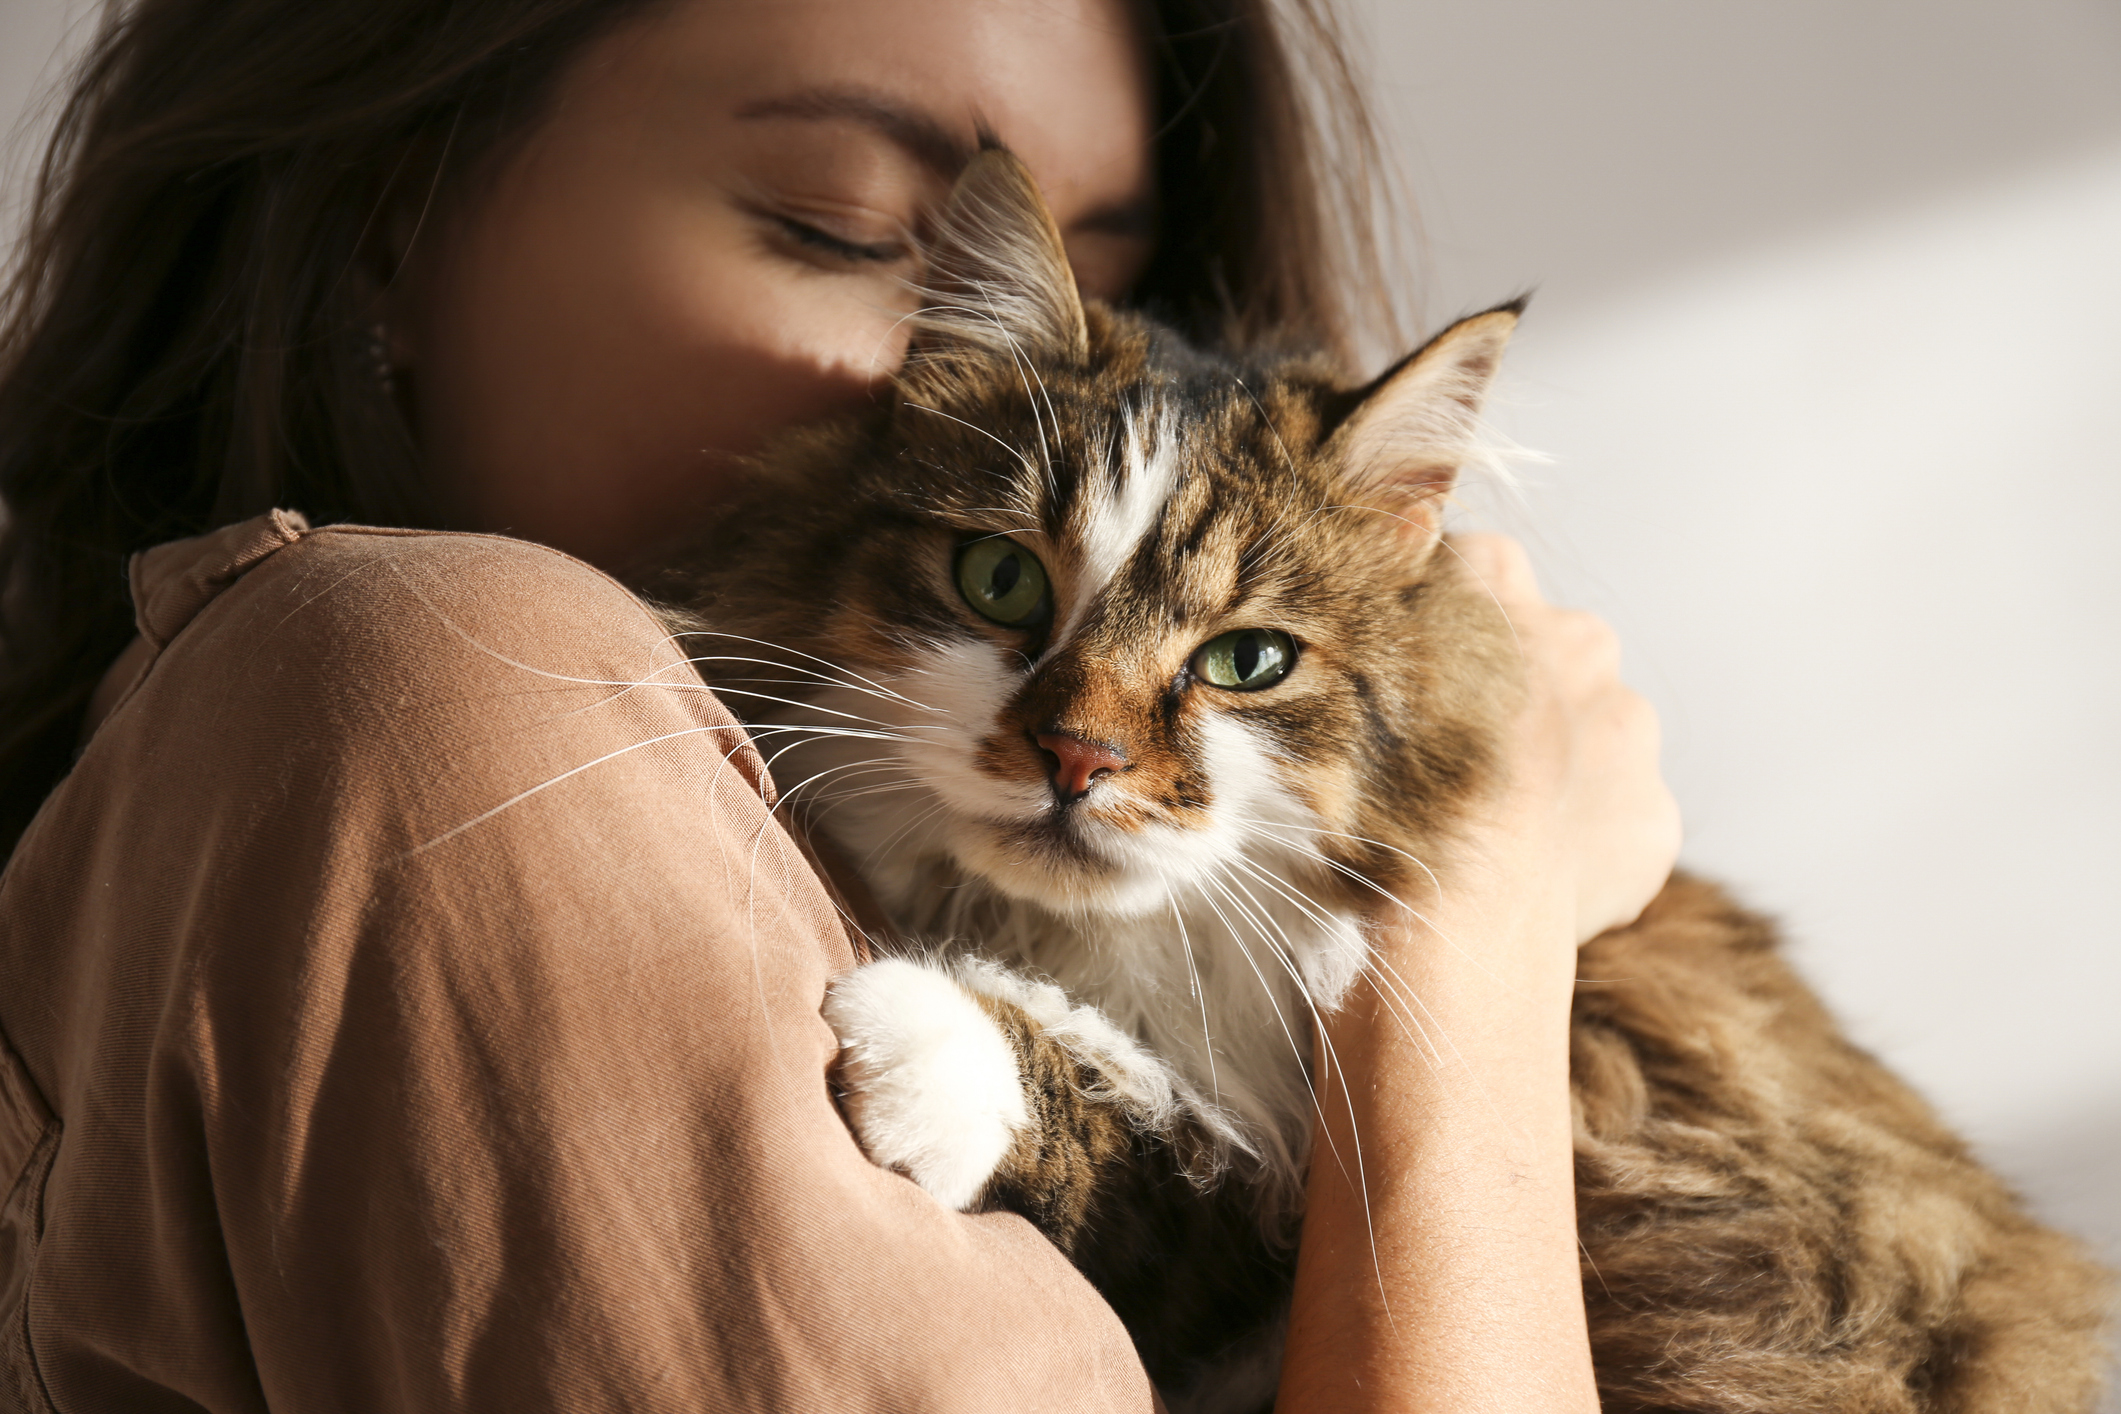 Use this ‘sign’ language to have a healthier relationship with your cat